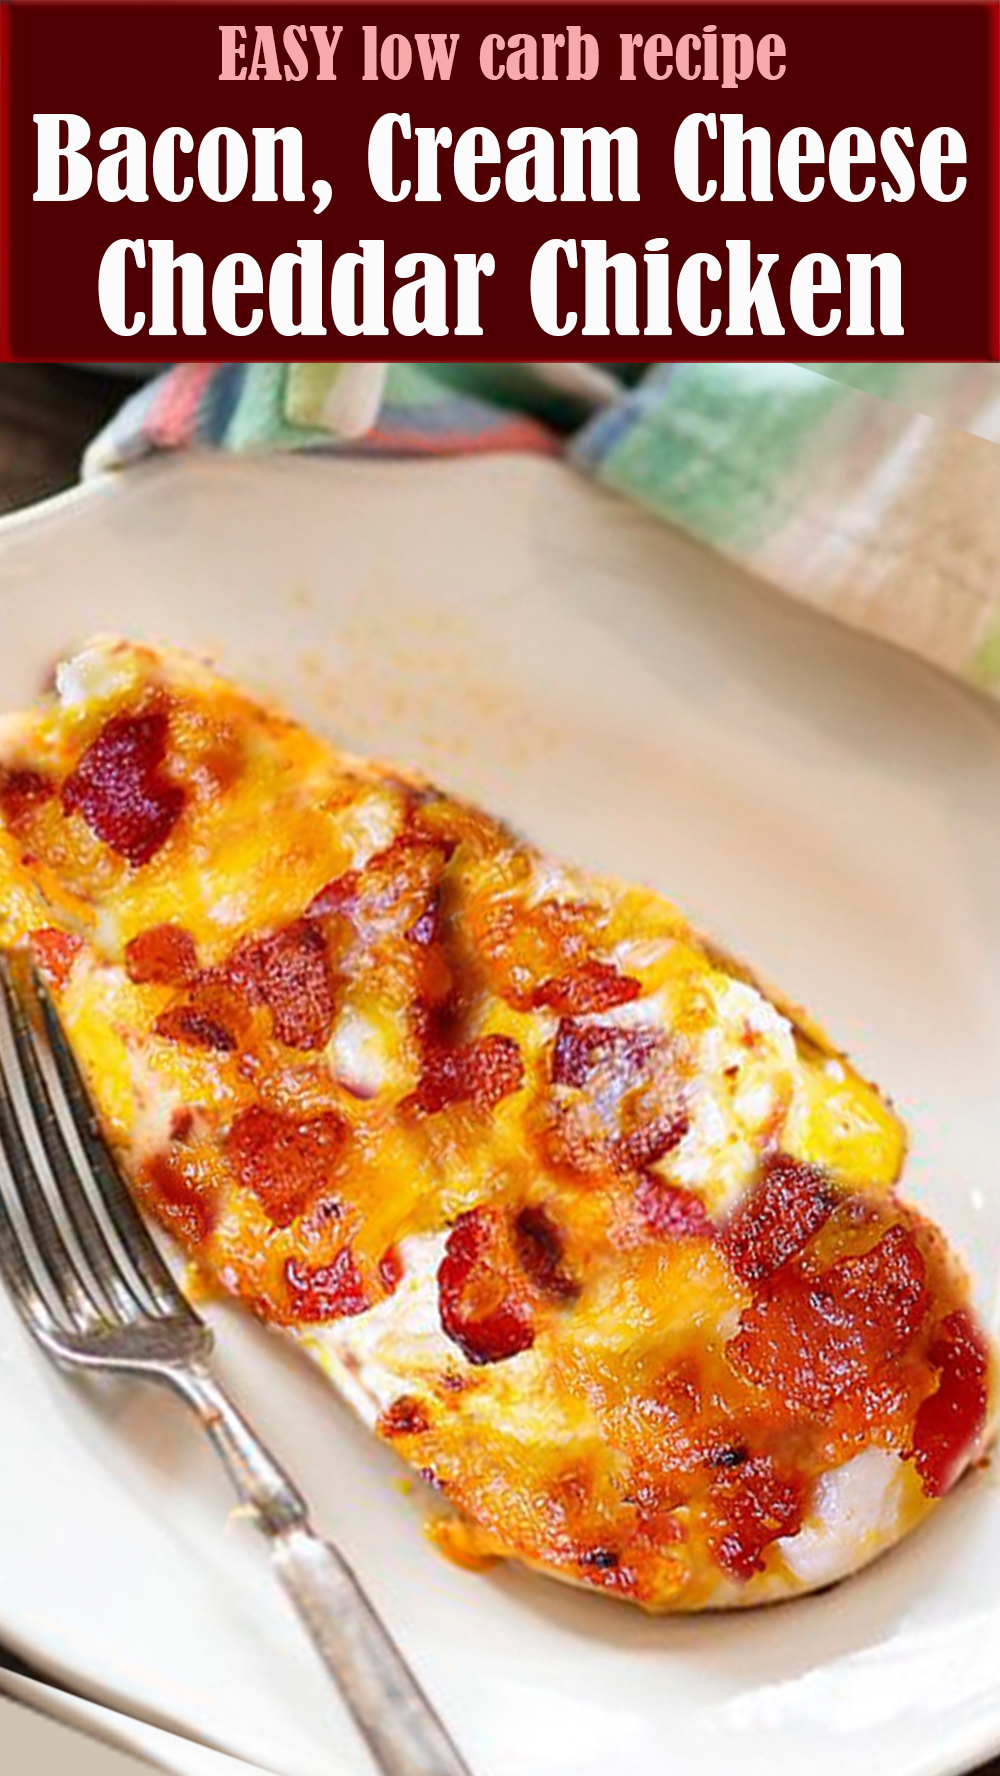 EASY Bacon, Cream Cheese and Cheddar Chicken